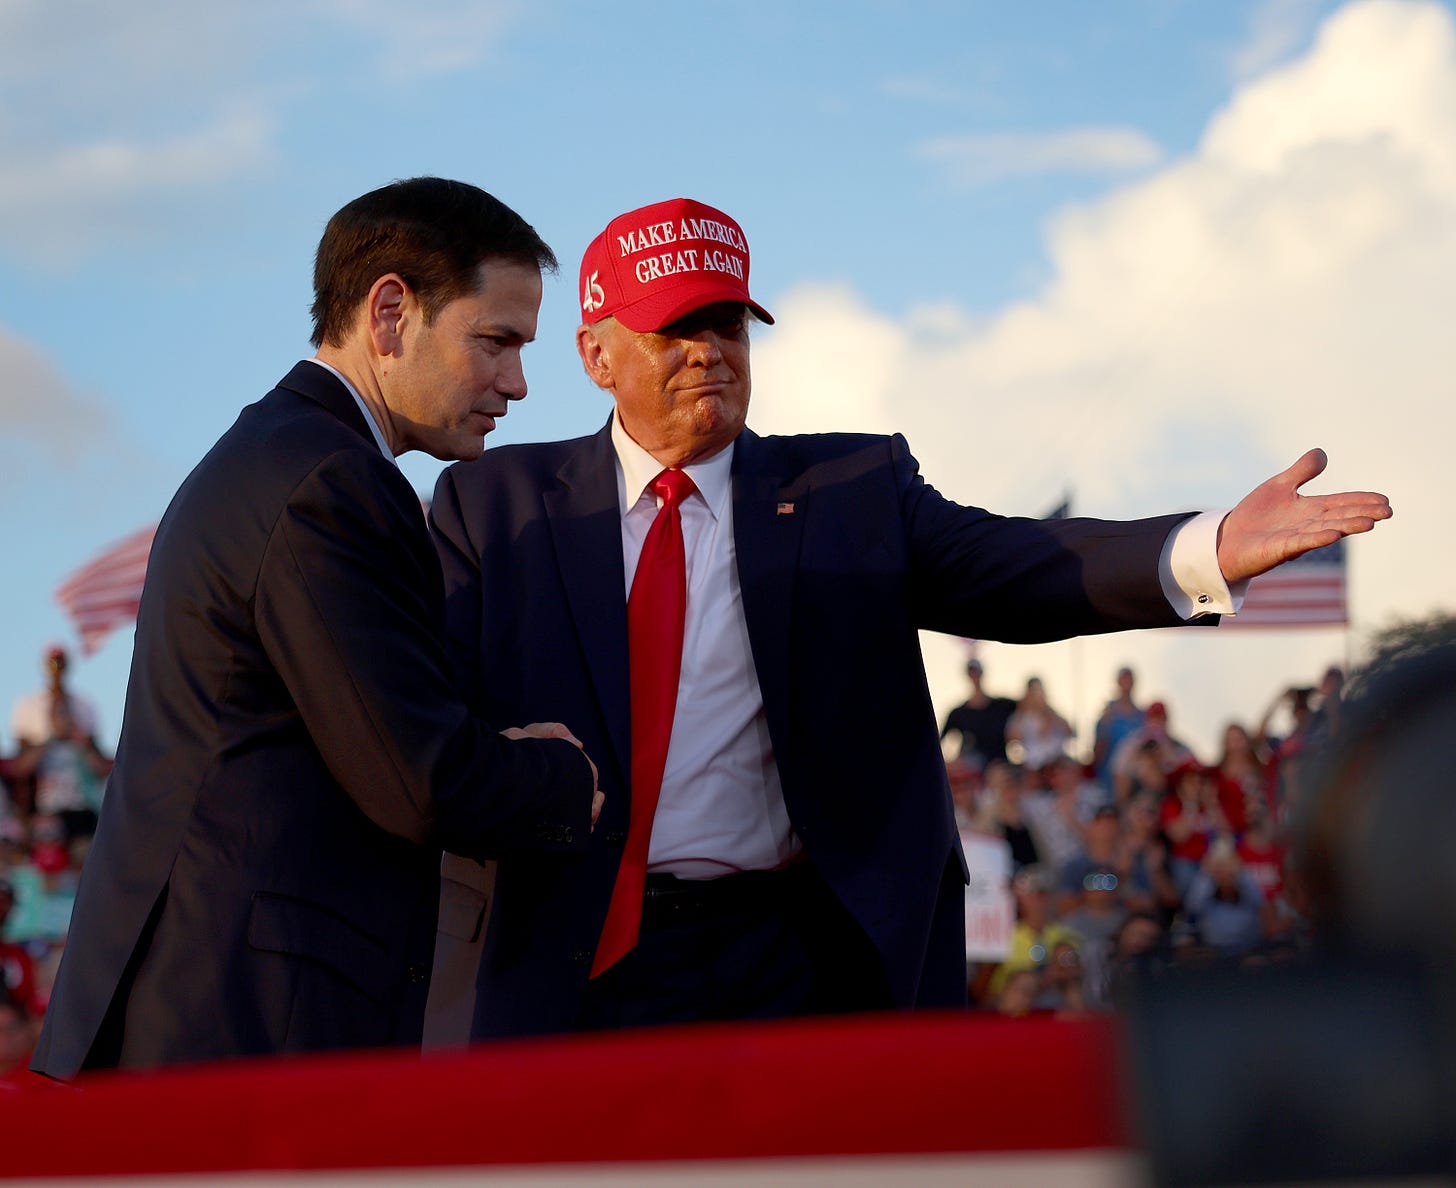 (Trump invites Sen. Marco Rubio to speak during a rally at the Miami-Dade County Fair and Exposition on Nov. 6, 2022, in Miami, Florida. Photo by Joe Raedle/Getty Images)